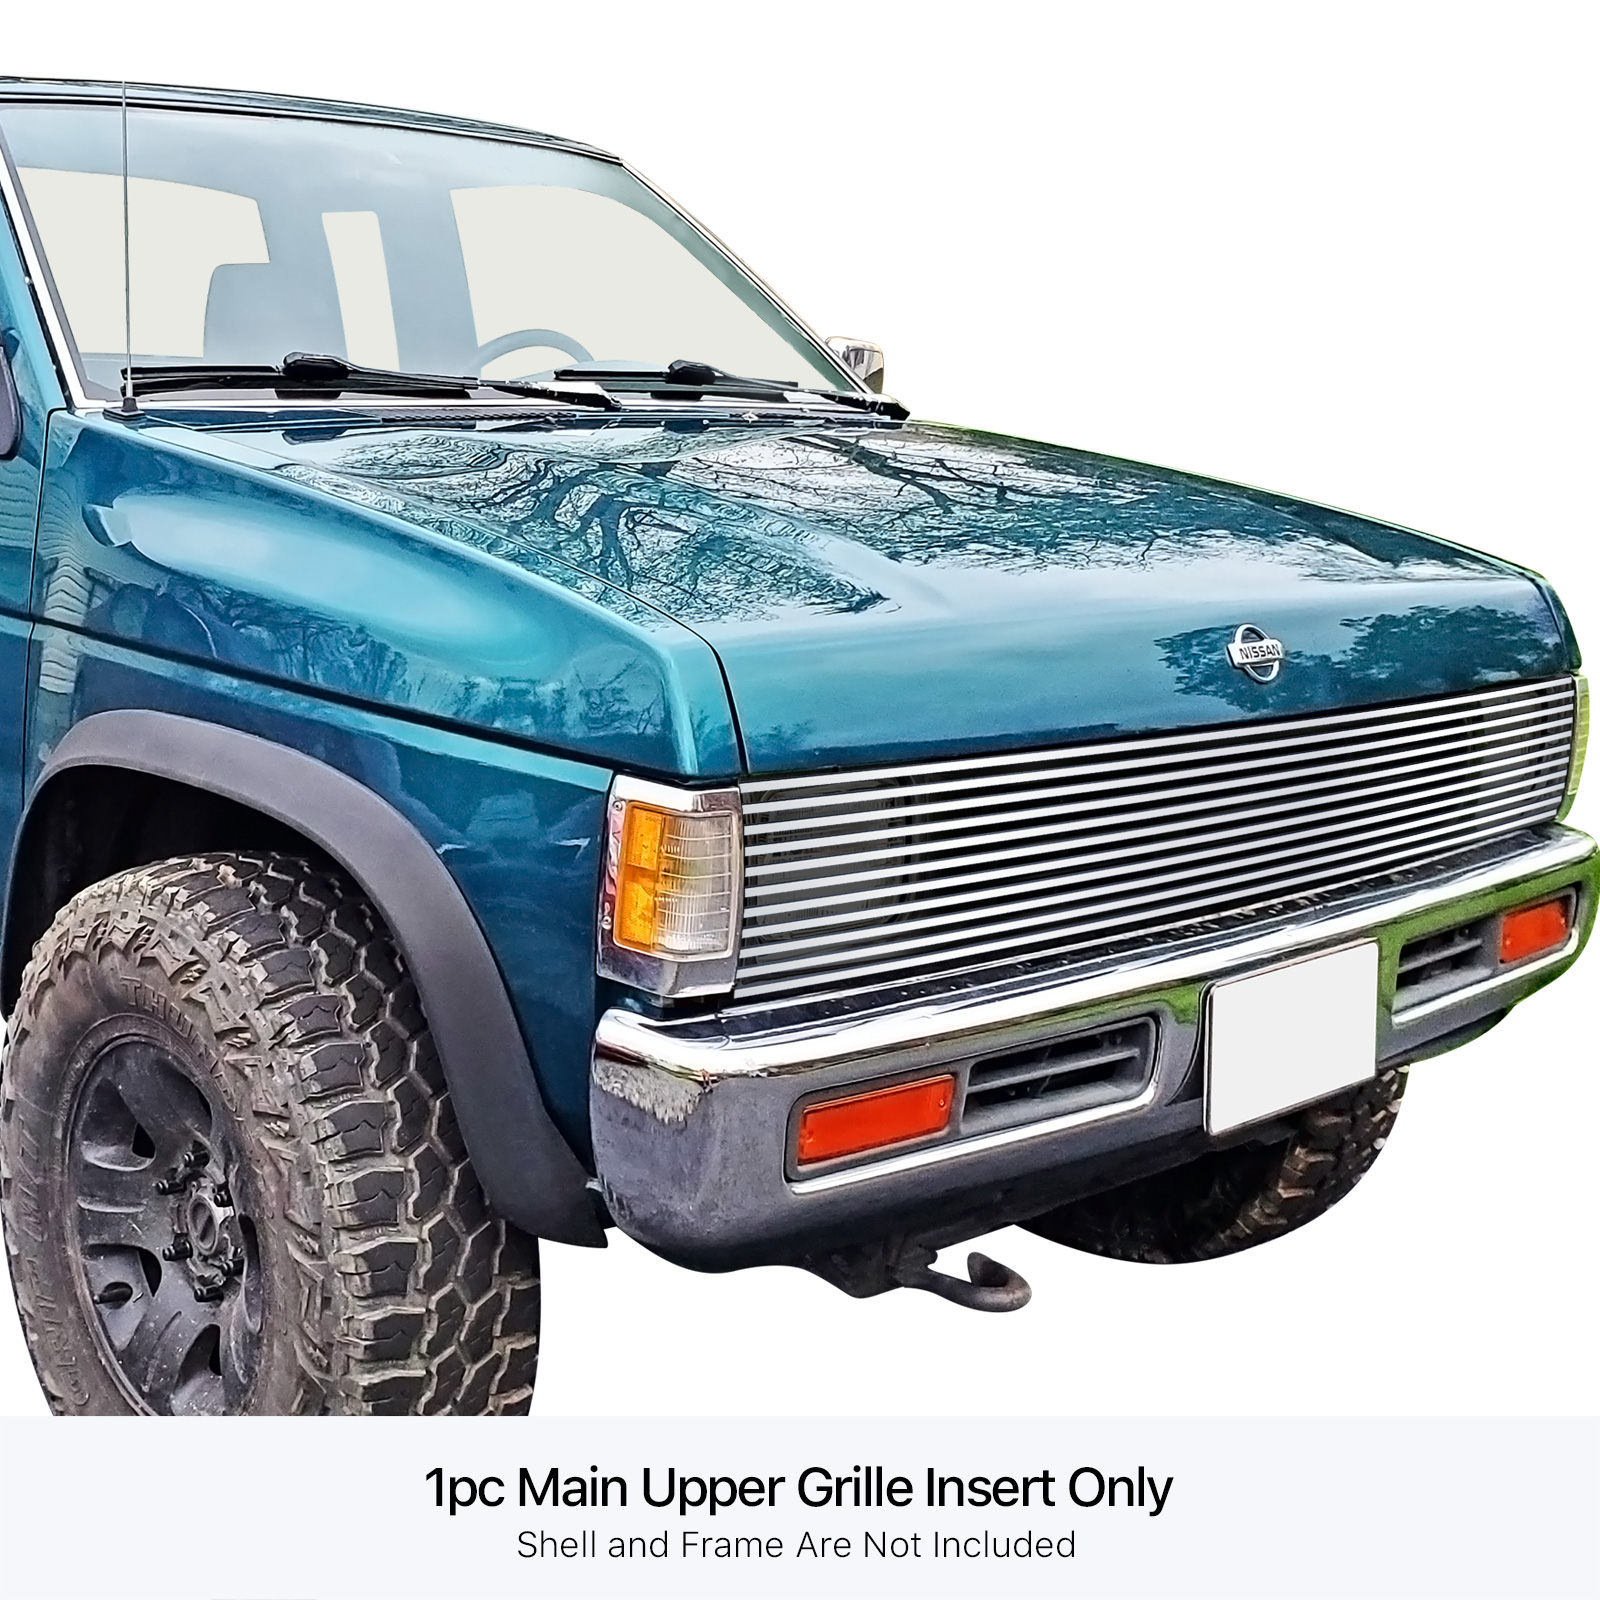 1986-1997 Nissan Pickup With/S. Beam Type H/Lamps - Requires Headlamps Recess MAIN UPPER Stainless Steel Billet Grille